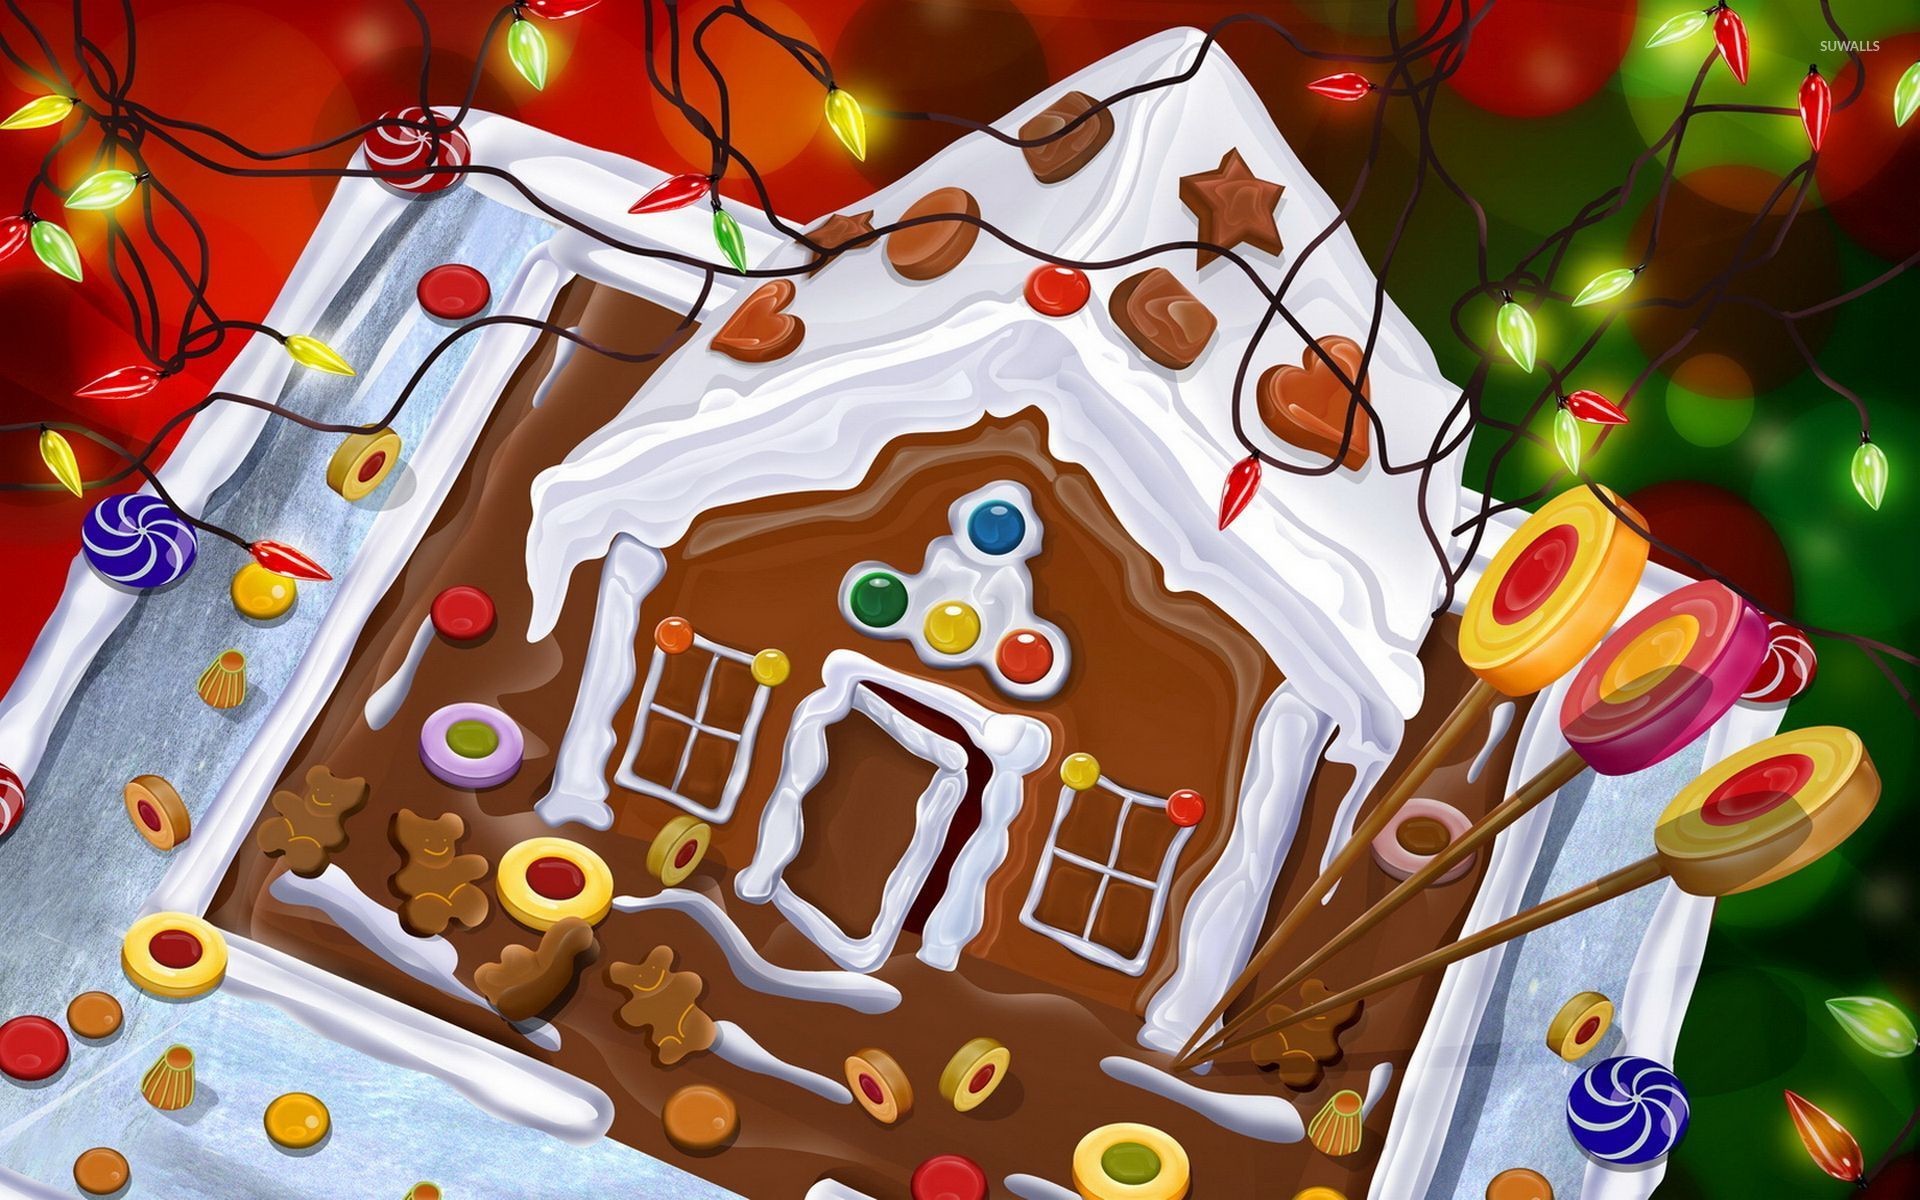 1920x1200 Gingerbread house and candies under the Christmas lights wallpaper